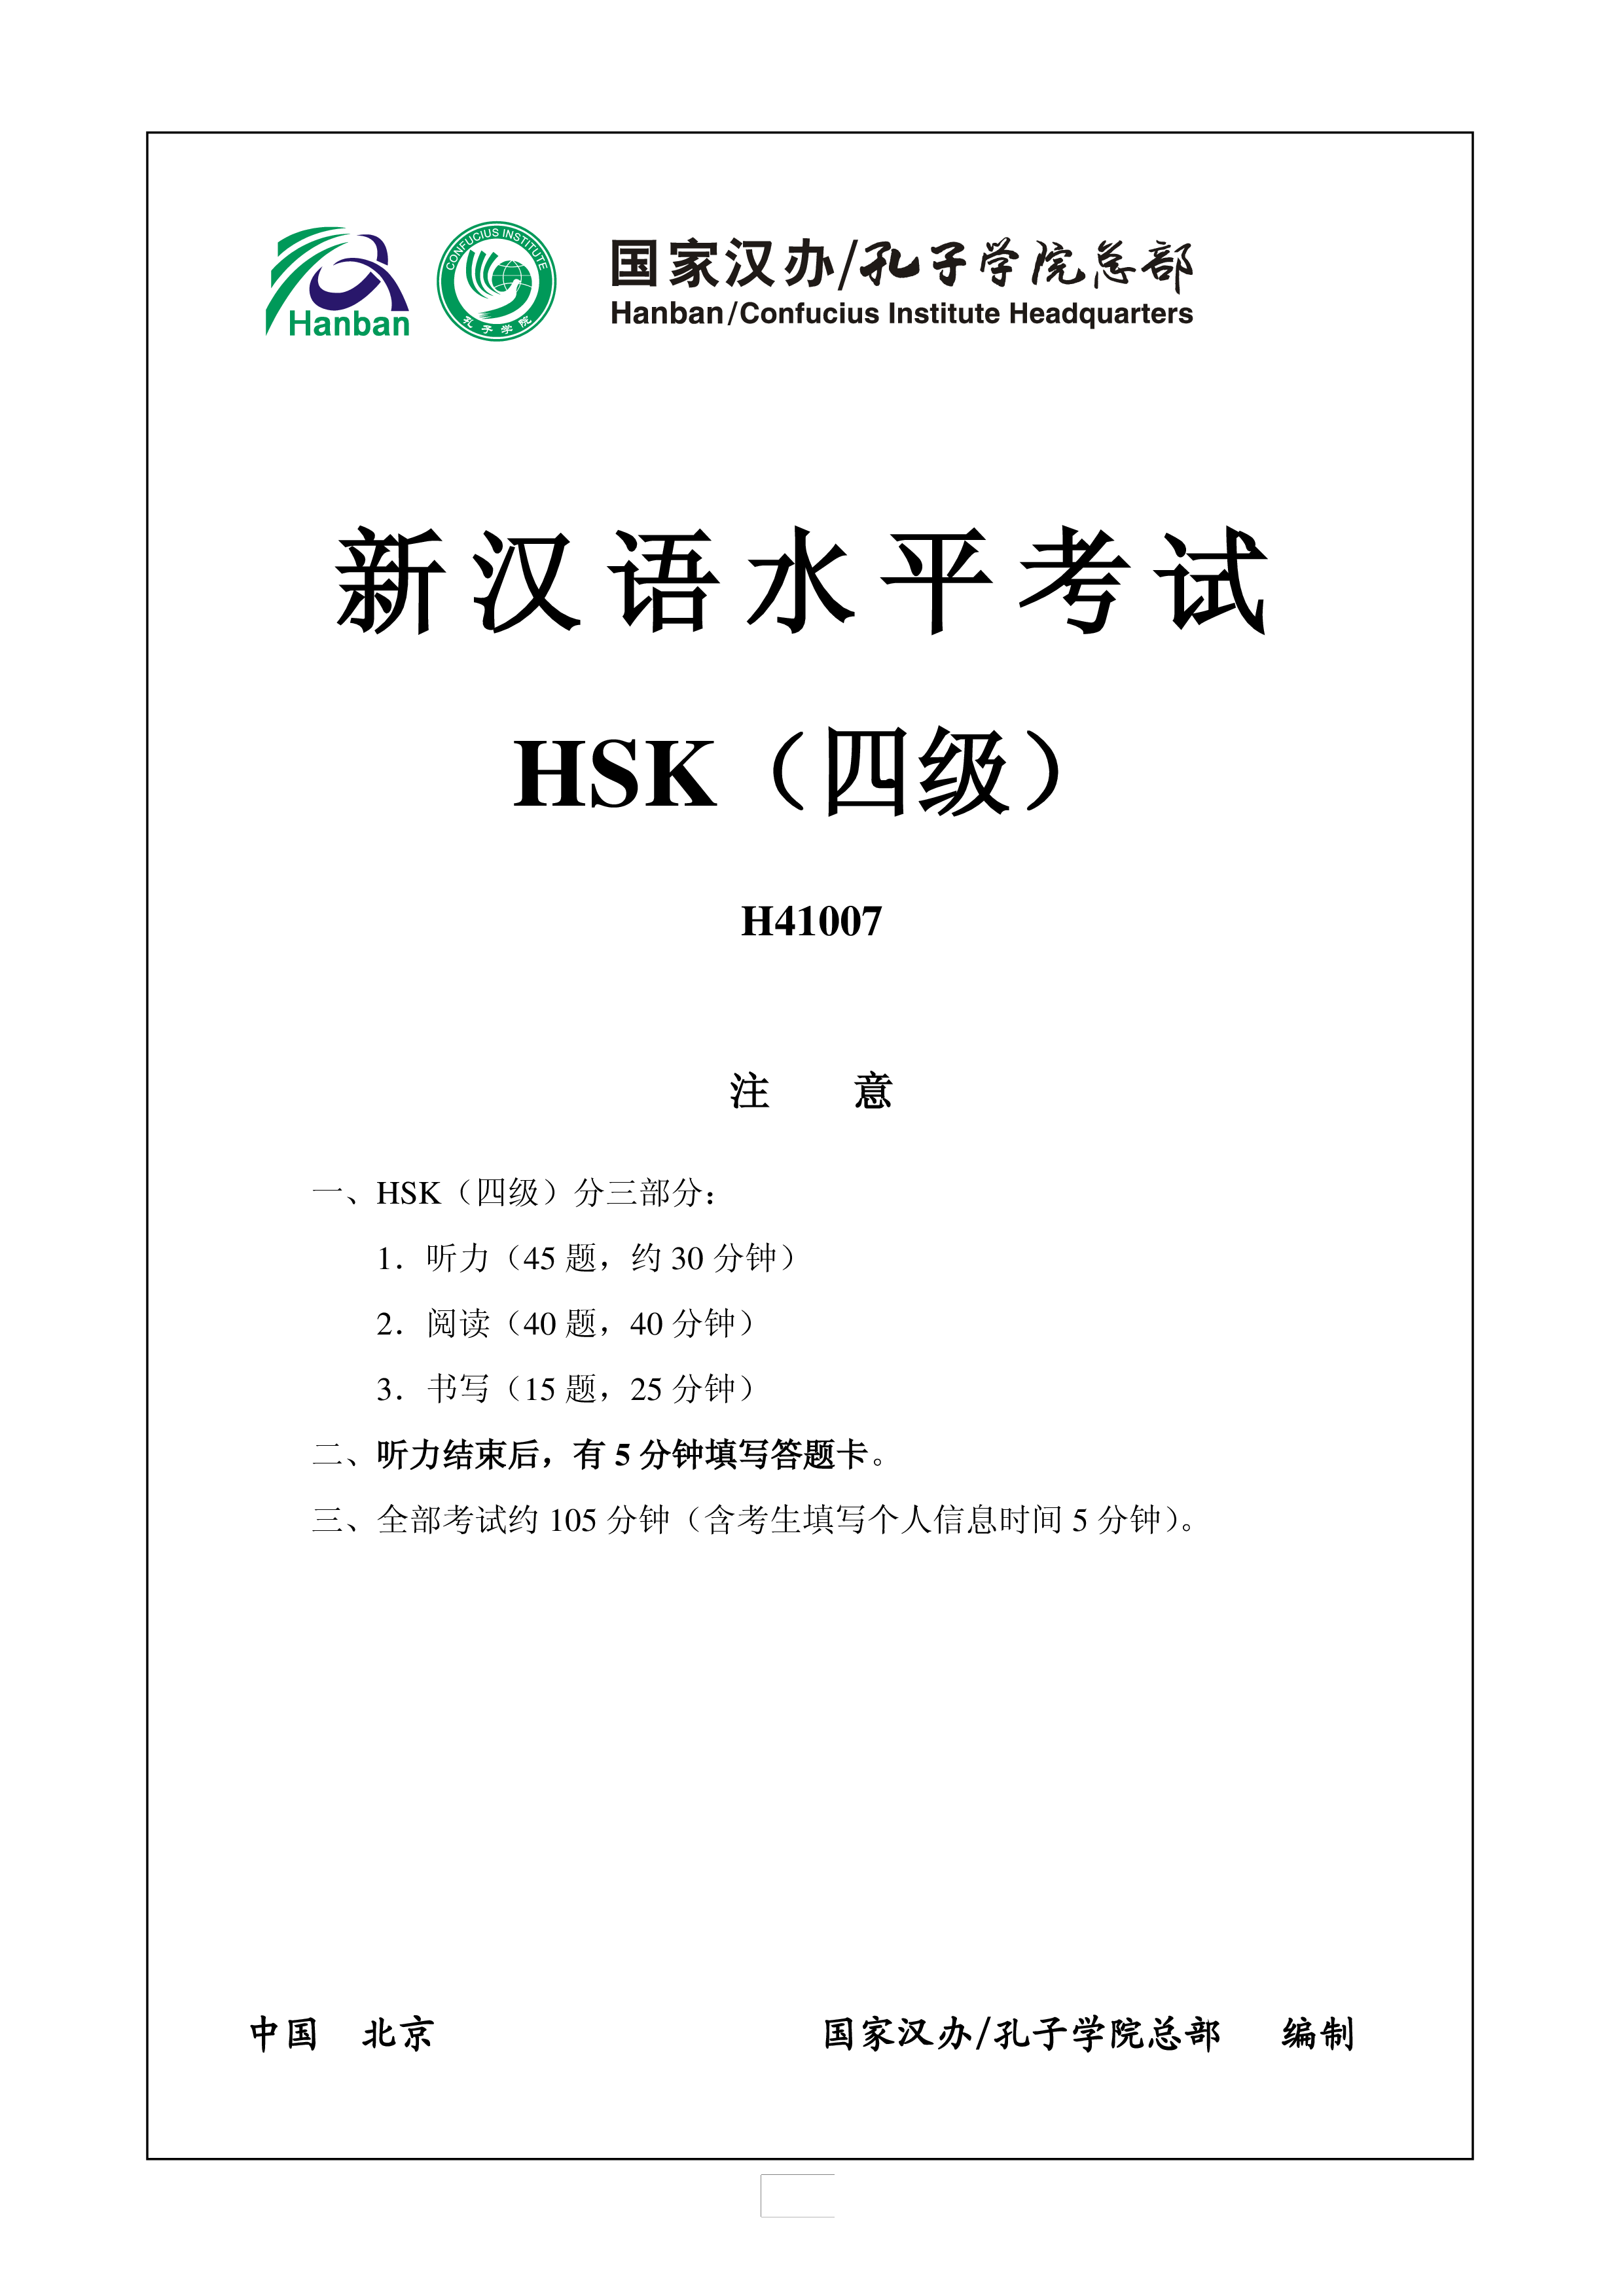 h41007 chinese exam hsk 4 incl audio and answers Hauptschablonenbild